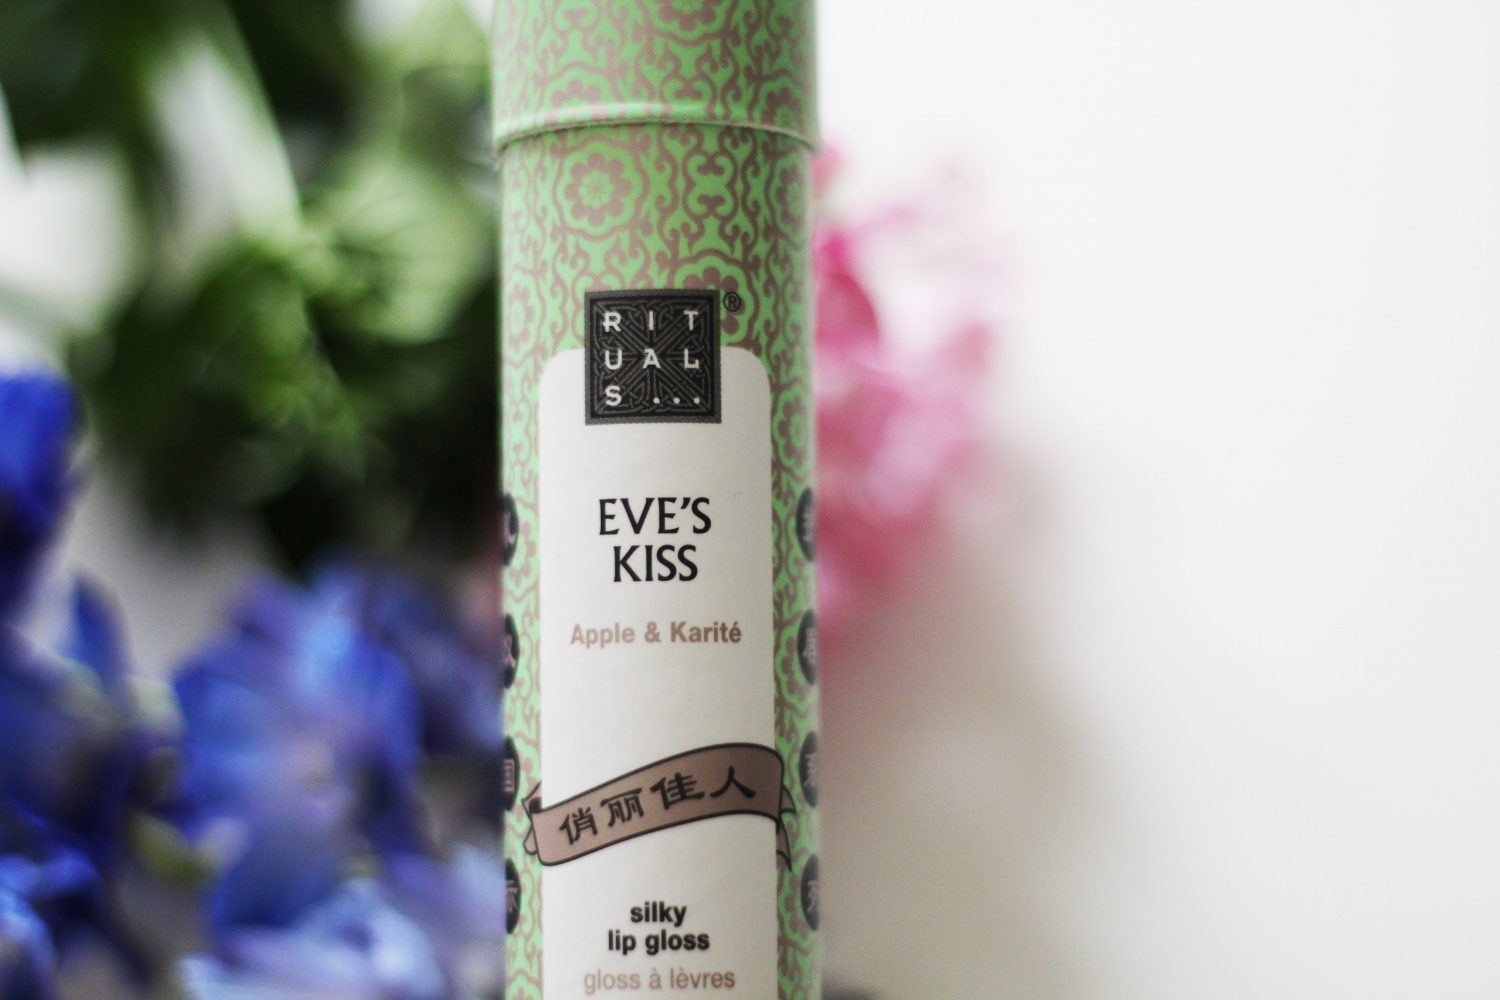 Review: Rituals Silky Lipgloss Eve’s Kiss